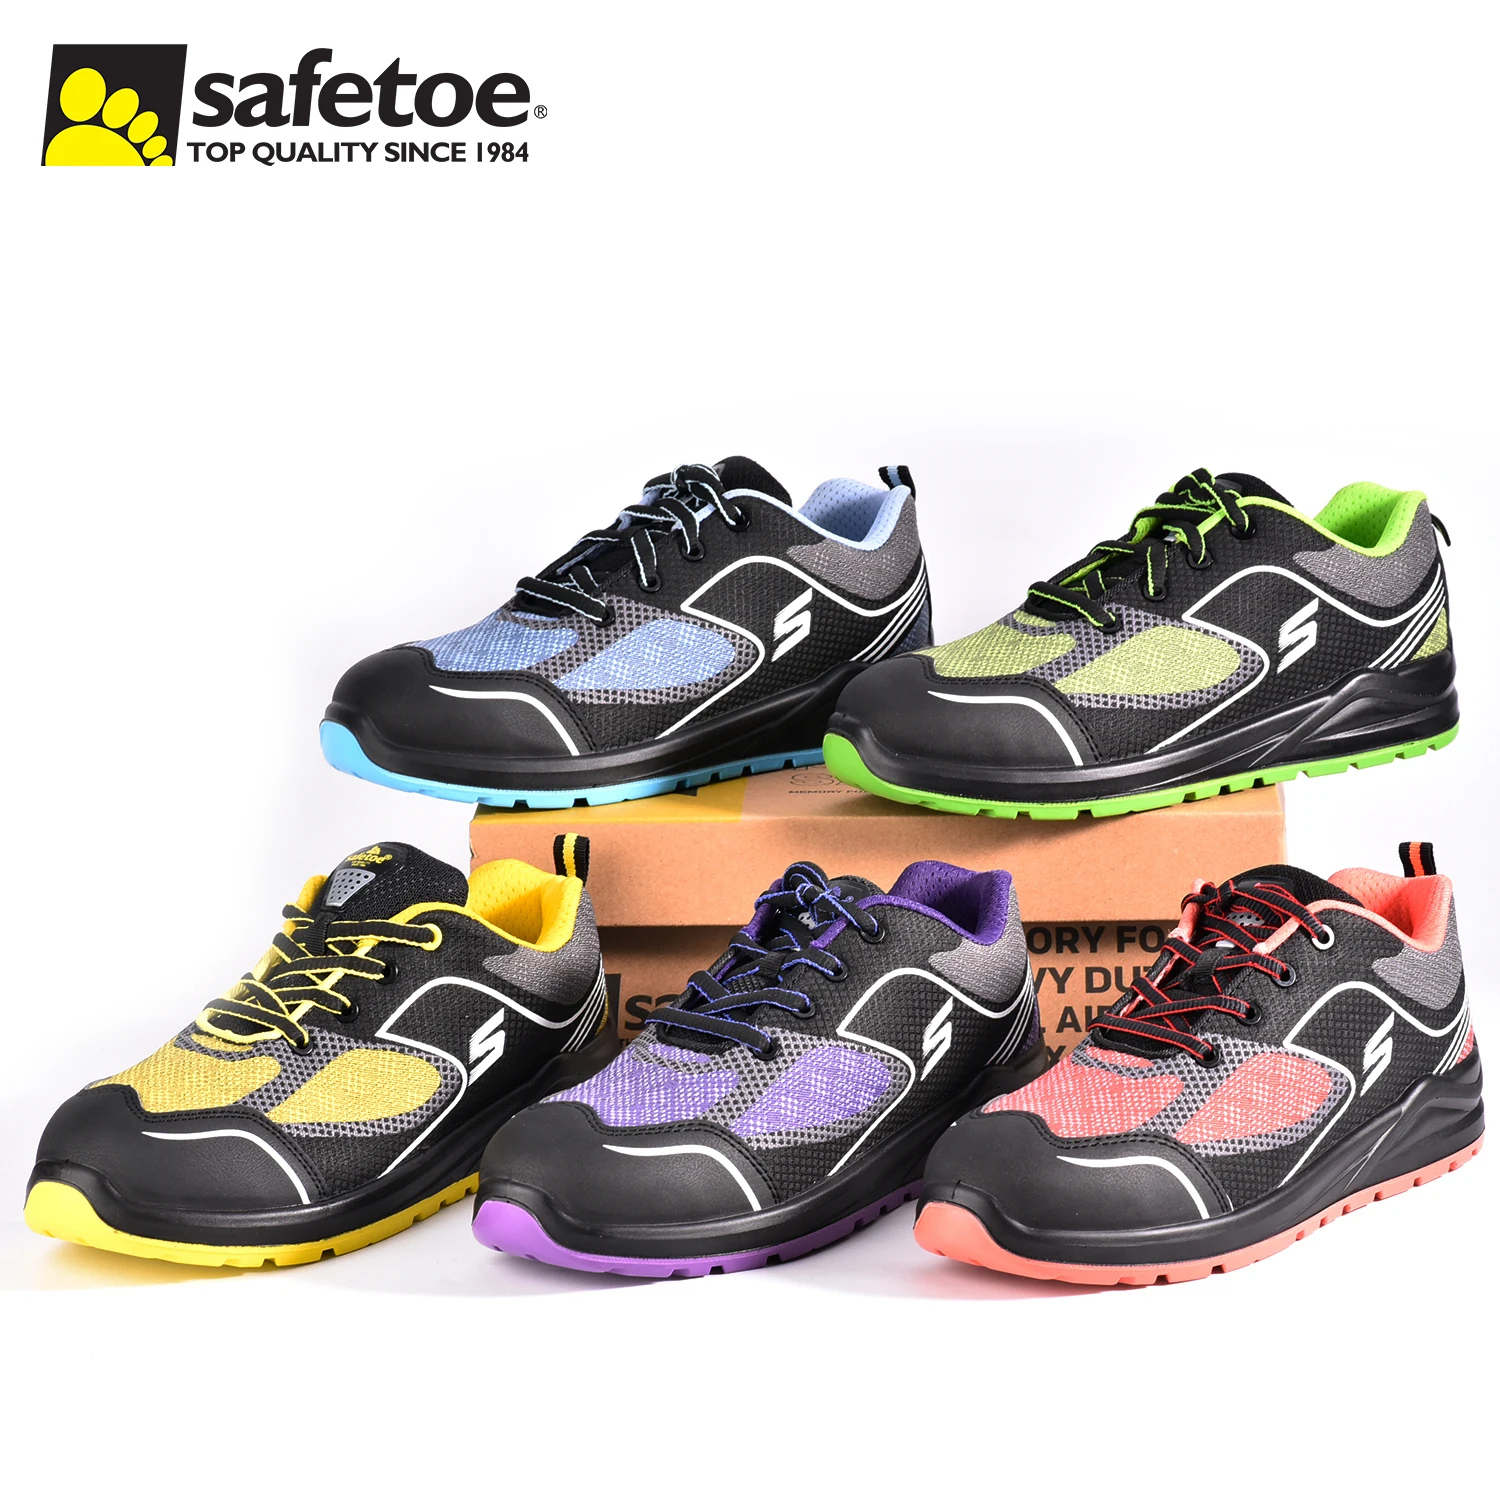 Mens Womens safety Steel Toe Cap Shoes Trainers Work Boots Sports Hiking UK 3-13 